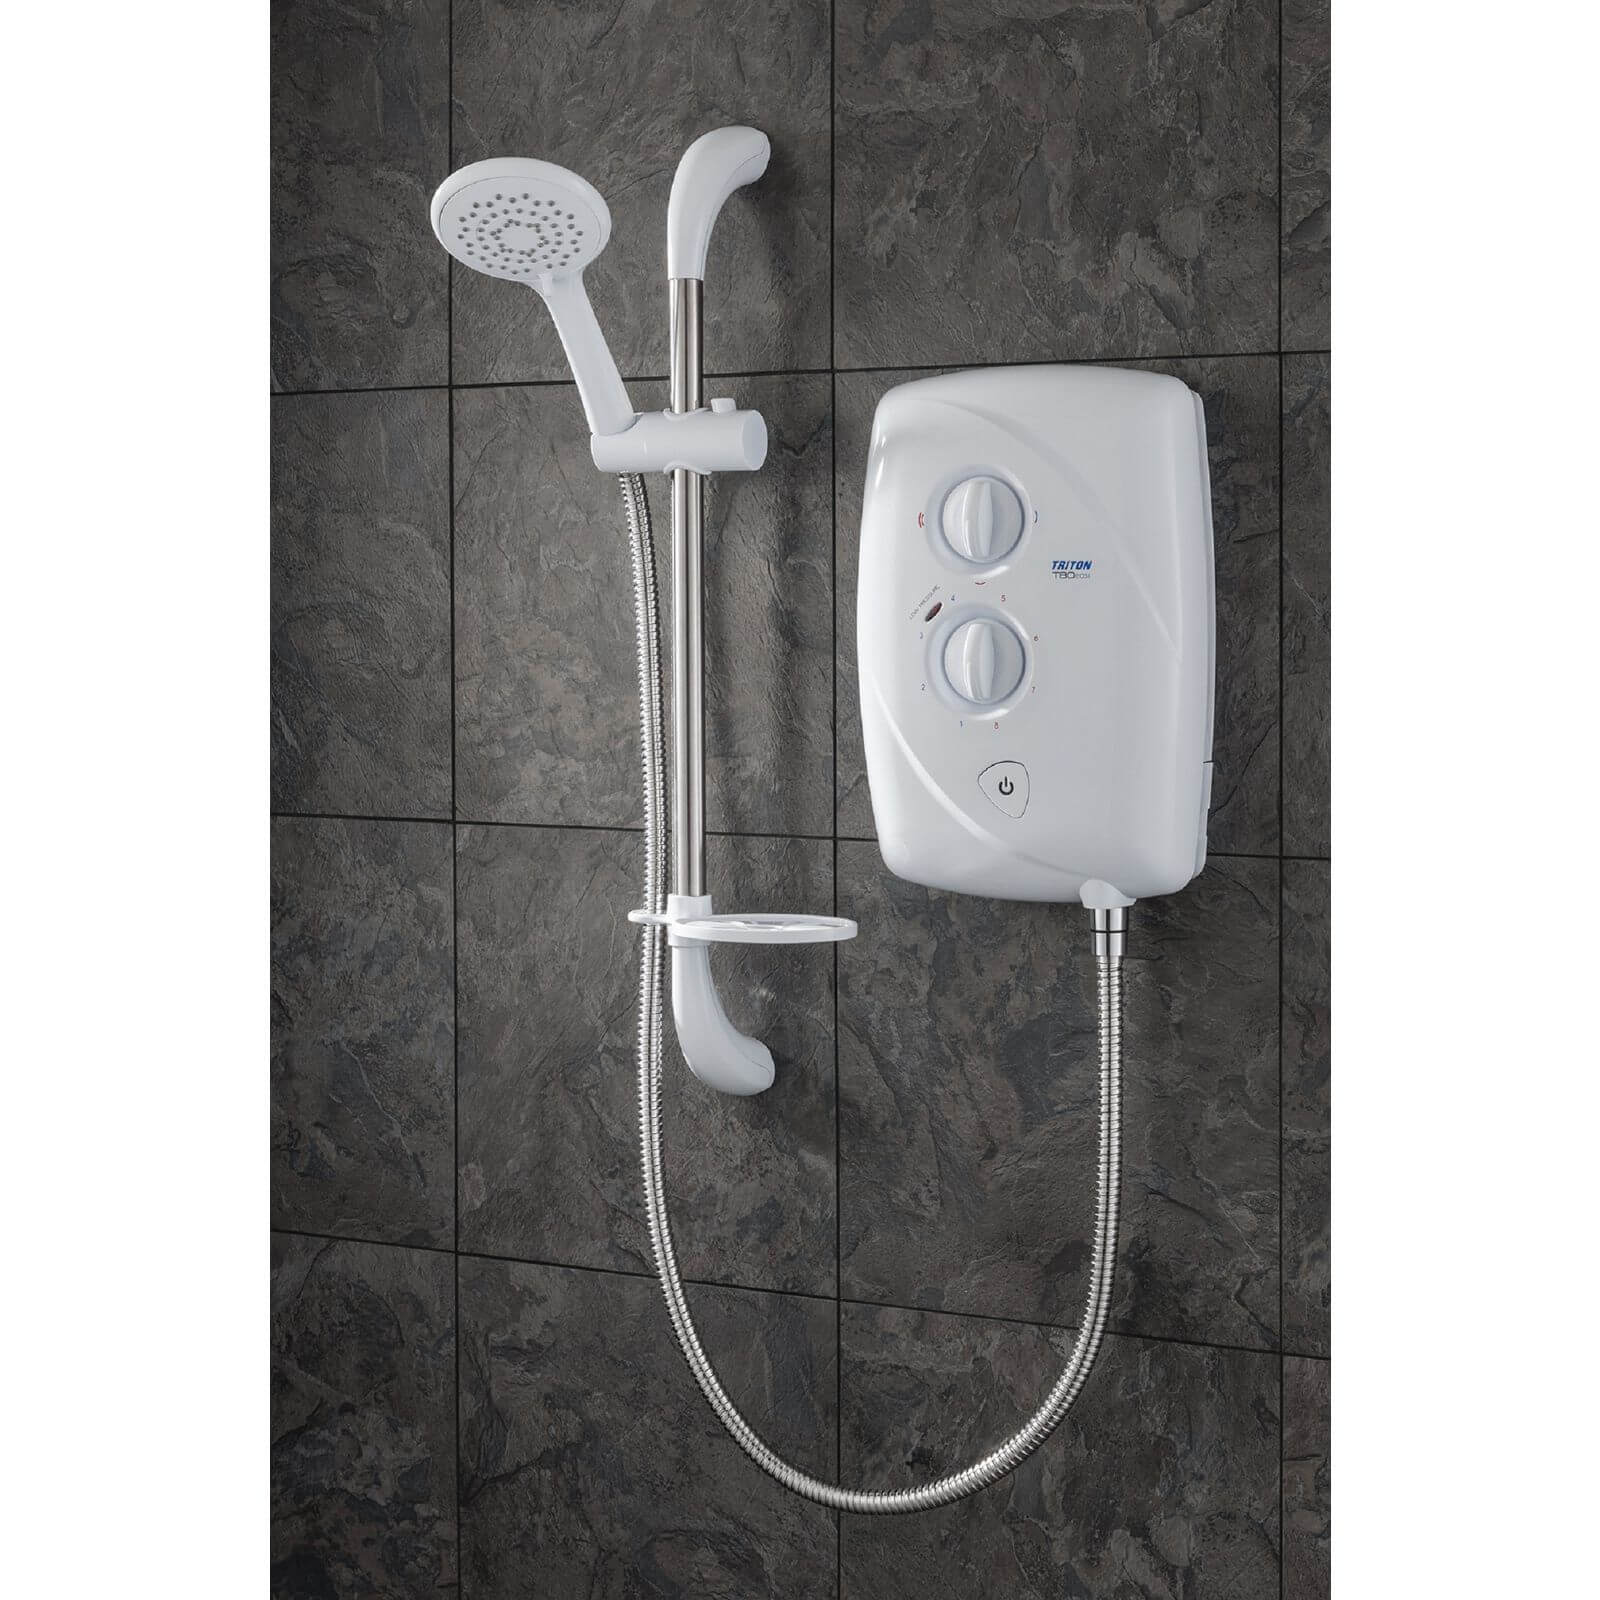 Triton T80Easi-fit 10.5kW Electric Shower - White